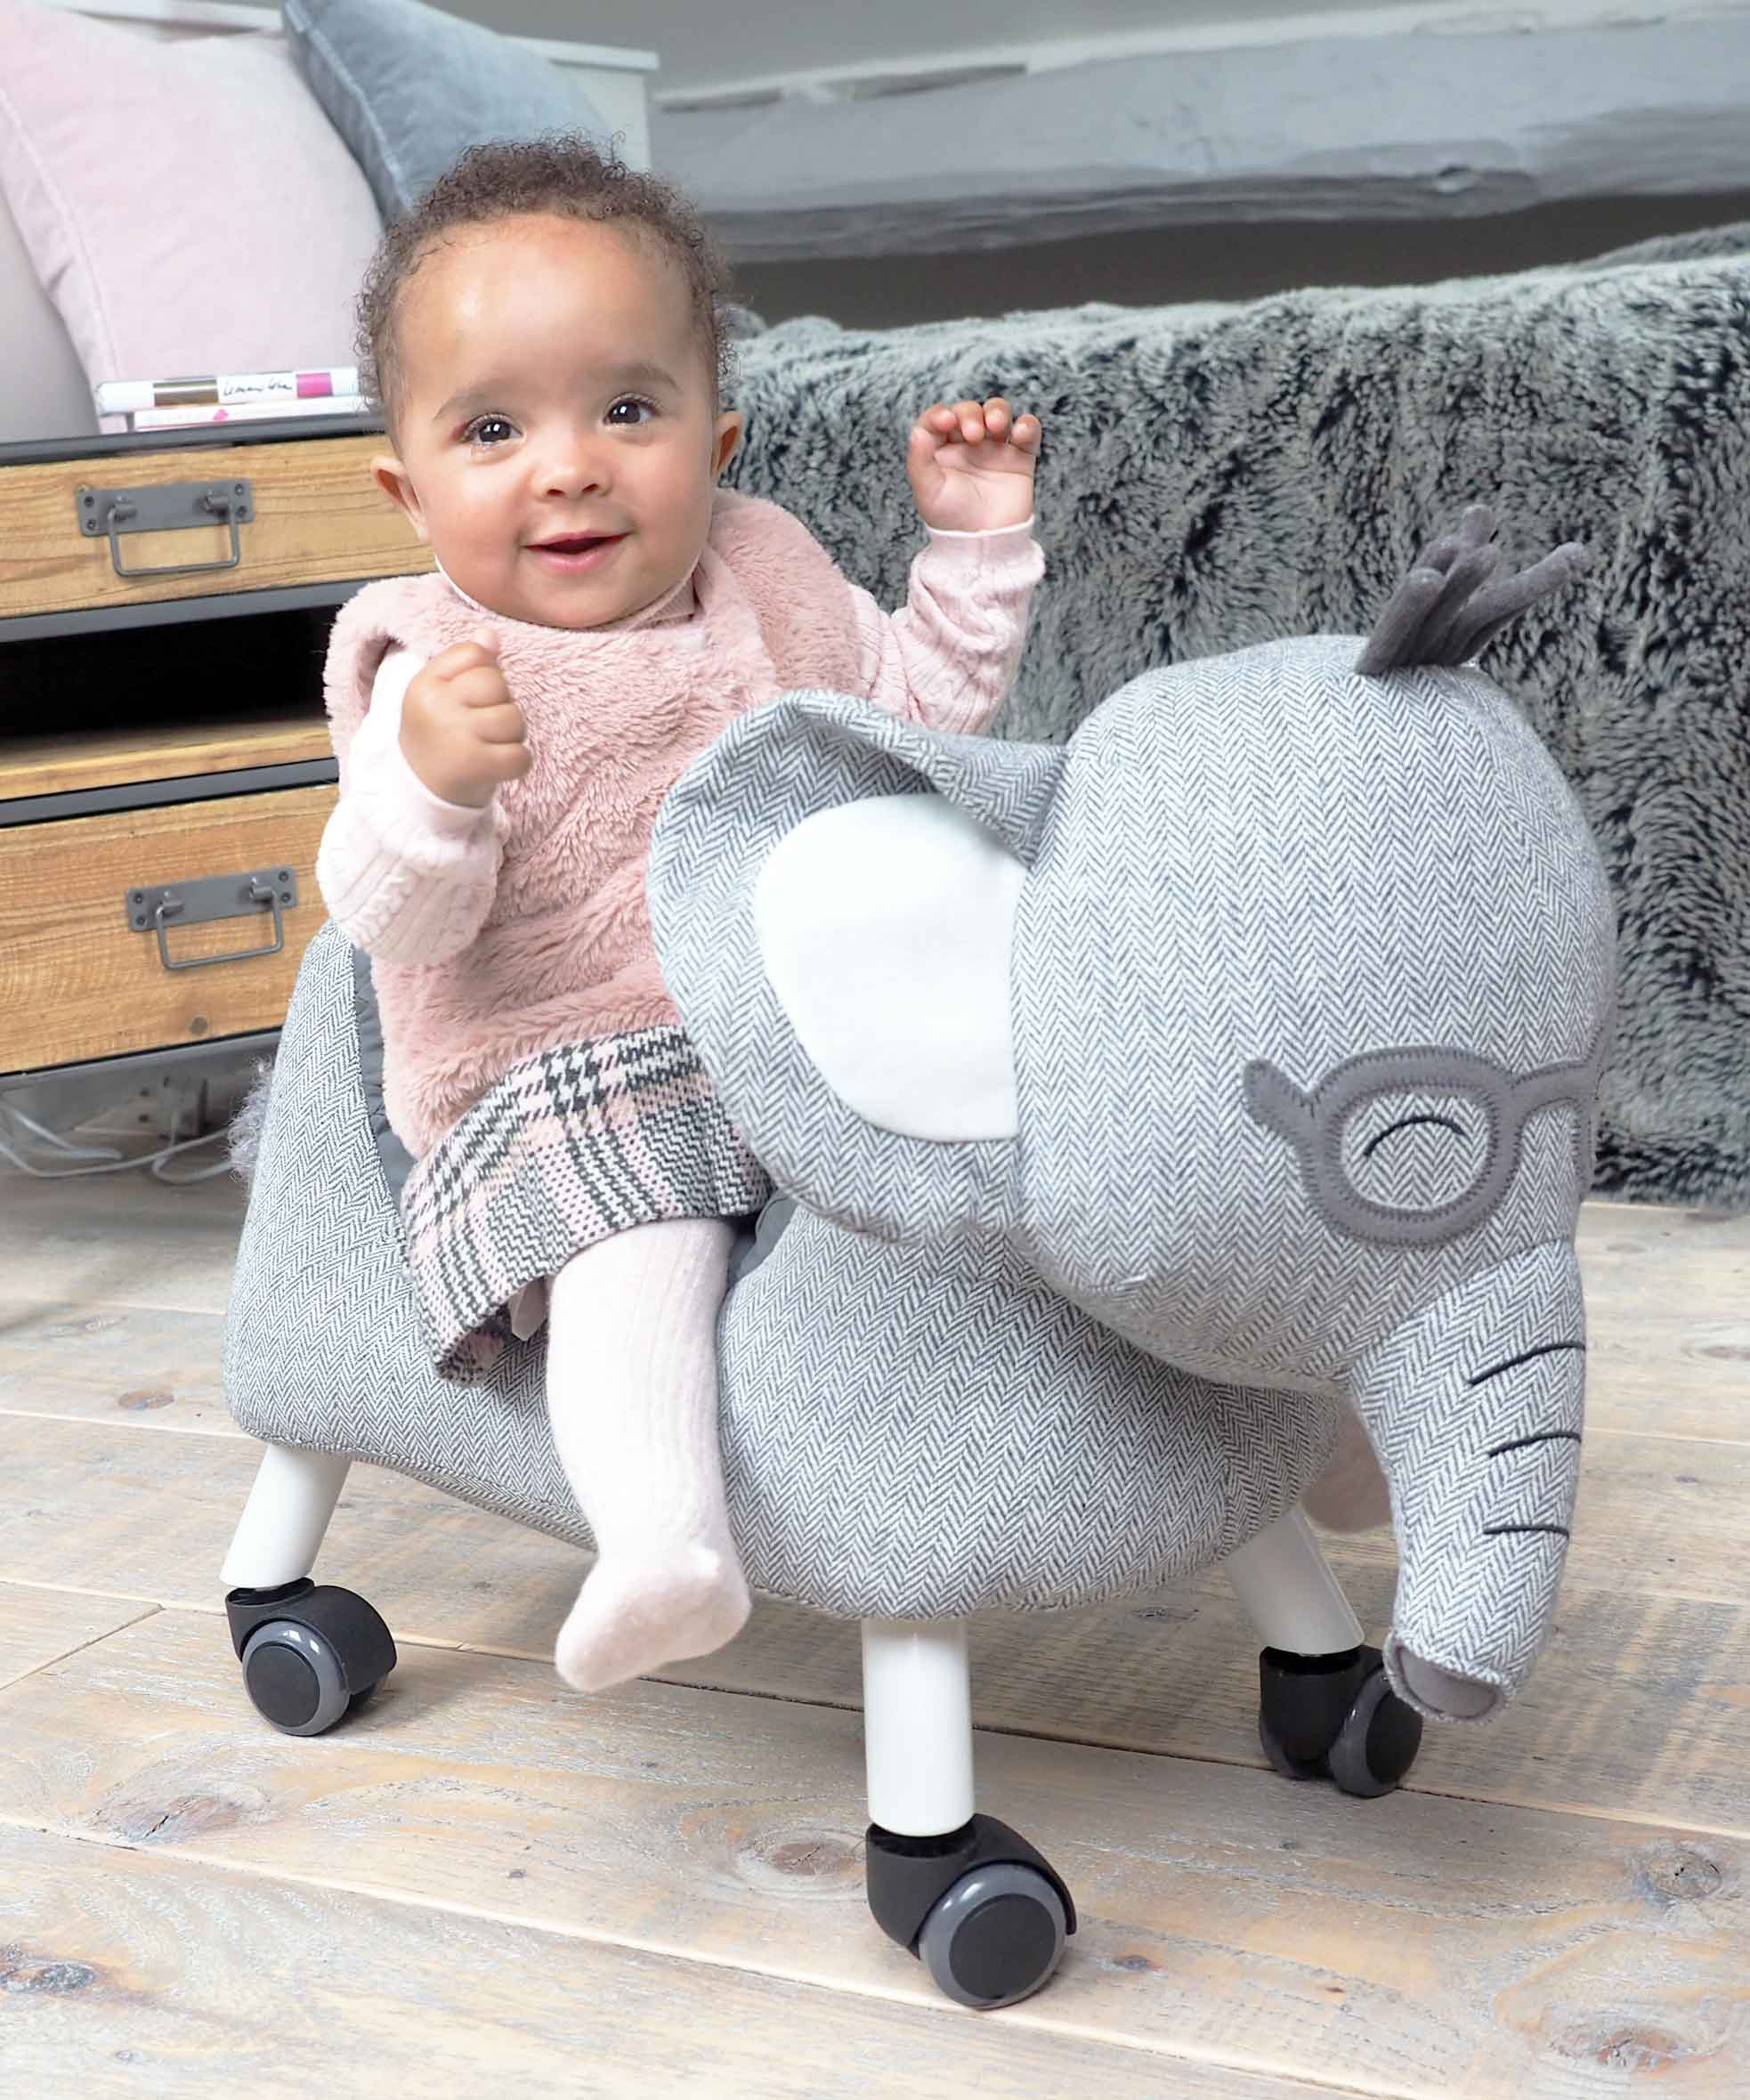 Little girl riding Cuthbert Elephant Ride On Toy with floppy ears